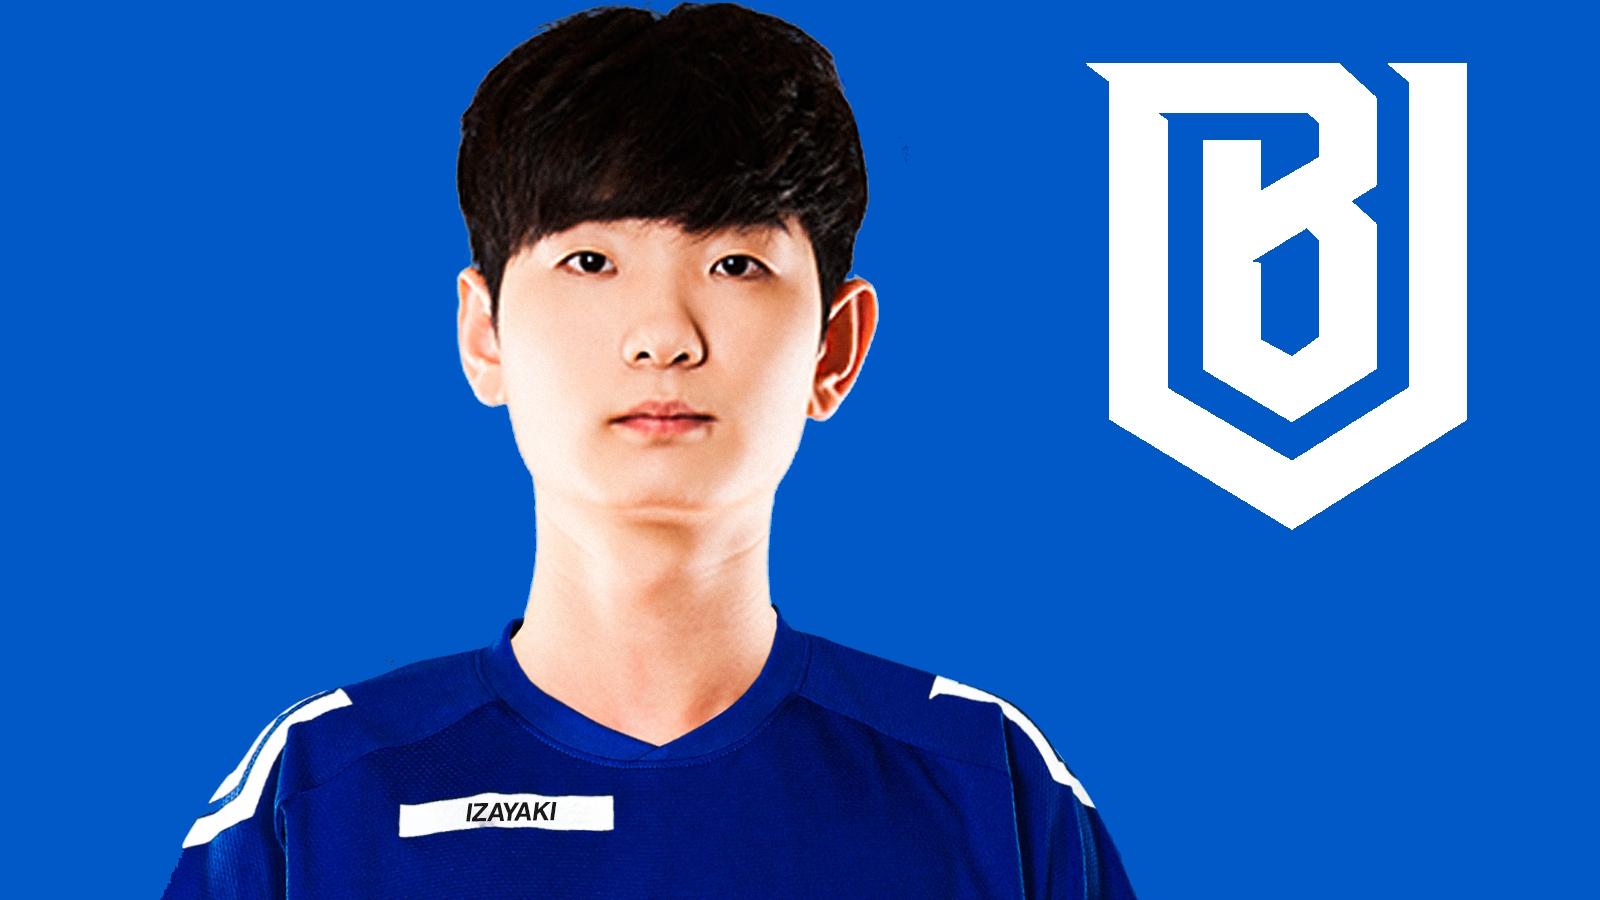 IZaYaki posing in Boston Uprising jersey with team logo and colors in background.